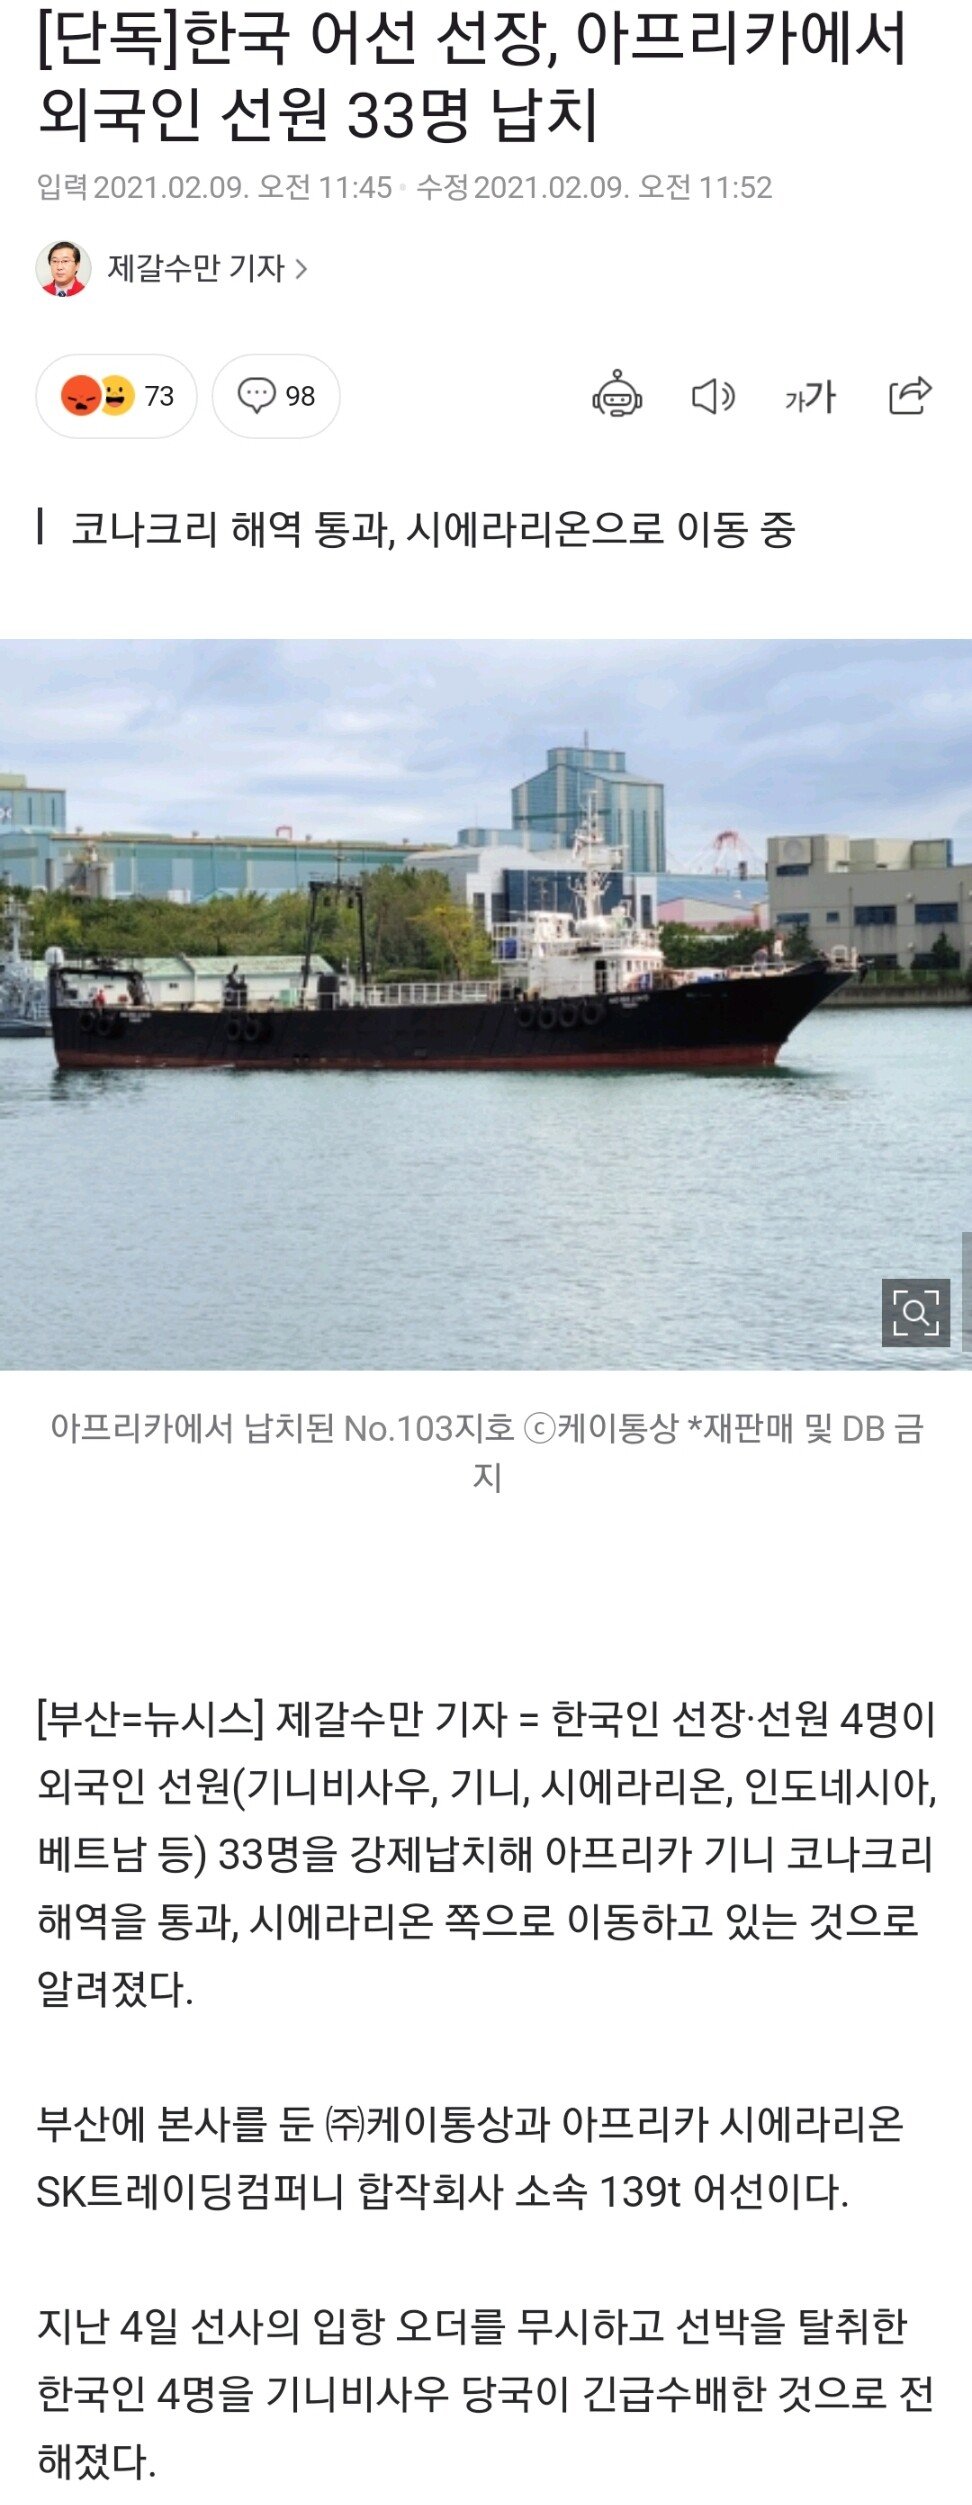 [Breaking news] [Urgent] South Korean captain abducted four sailors from Africa